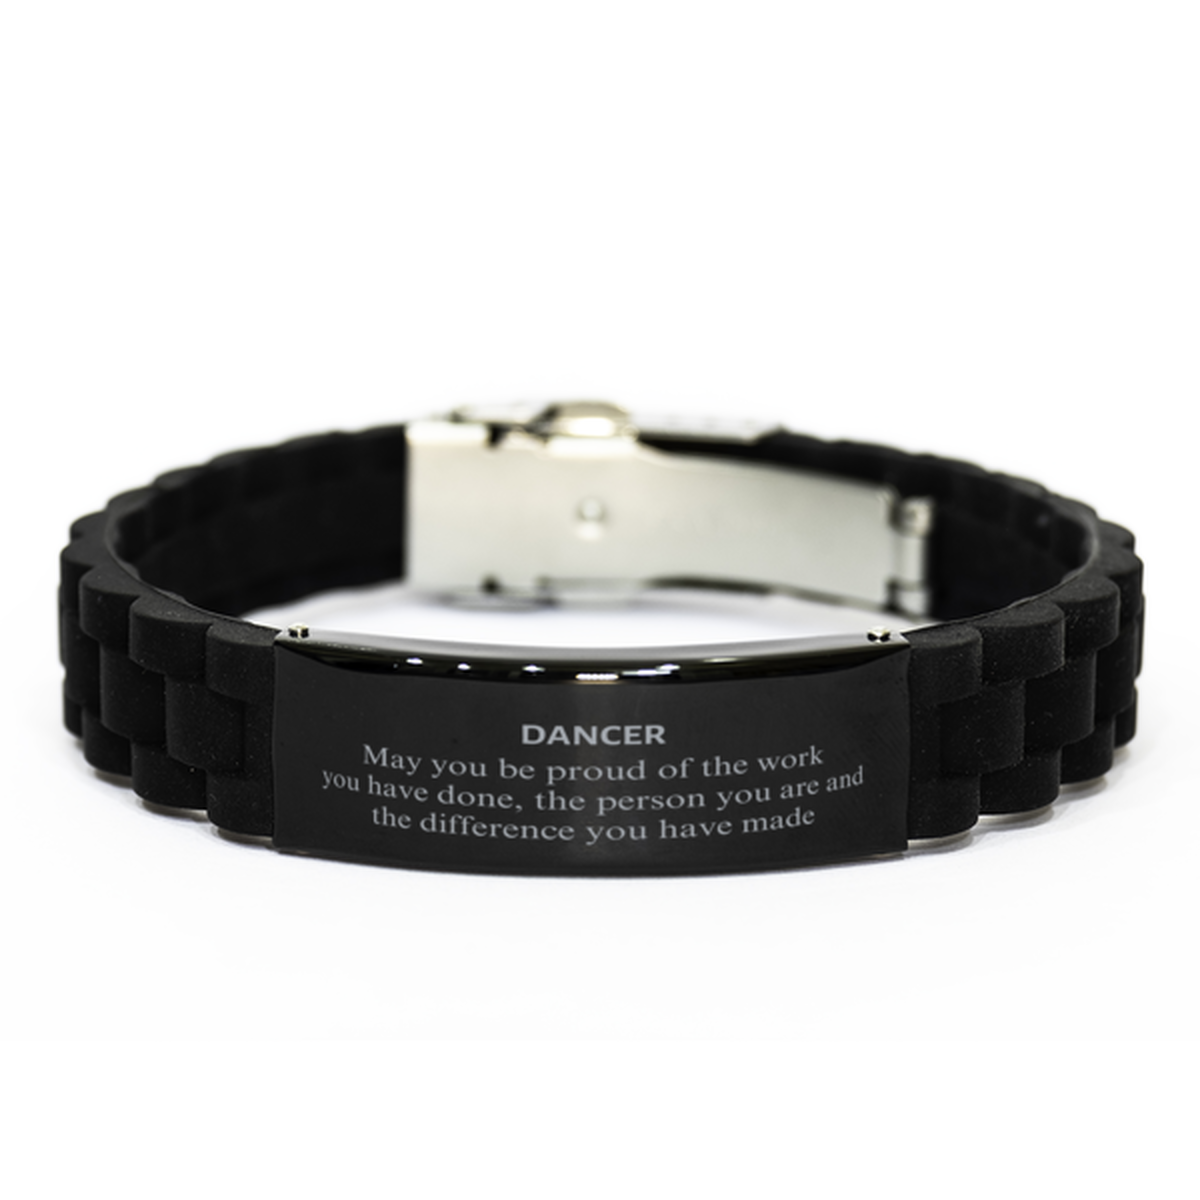 Dancer May you be proud of the work you have done, Retirement Dancer Black Glidelock Clasp Bracelet for Colleague Appreciation Gifts Amazing for Dancer